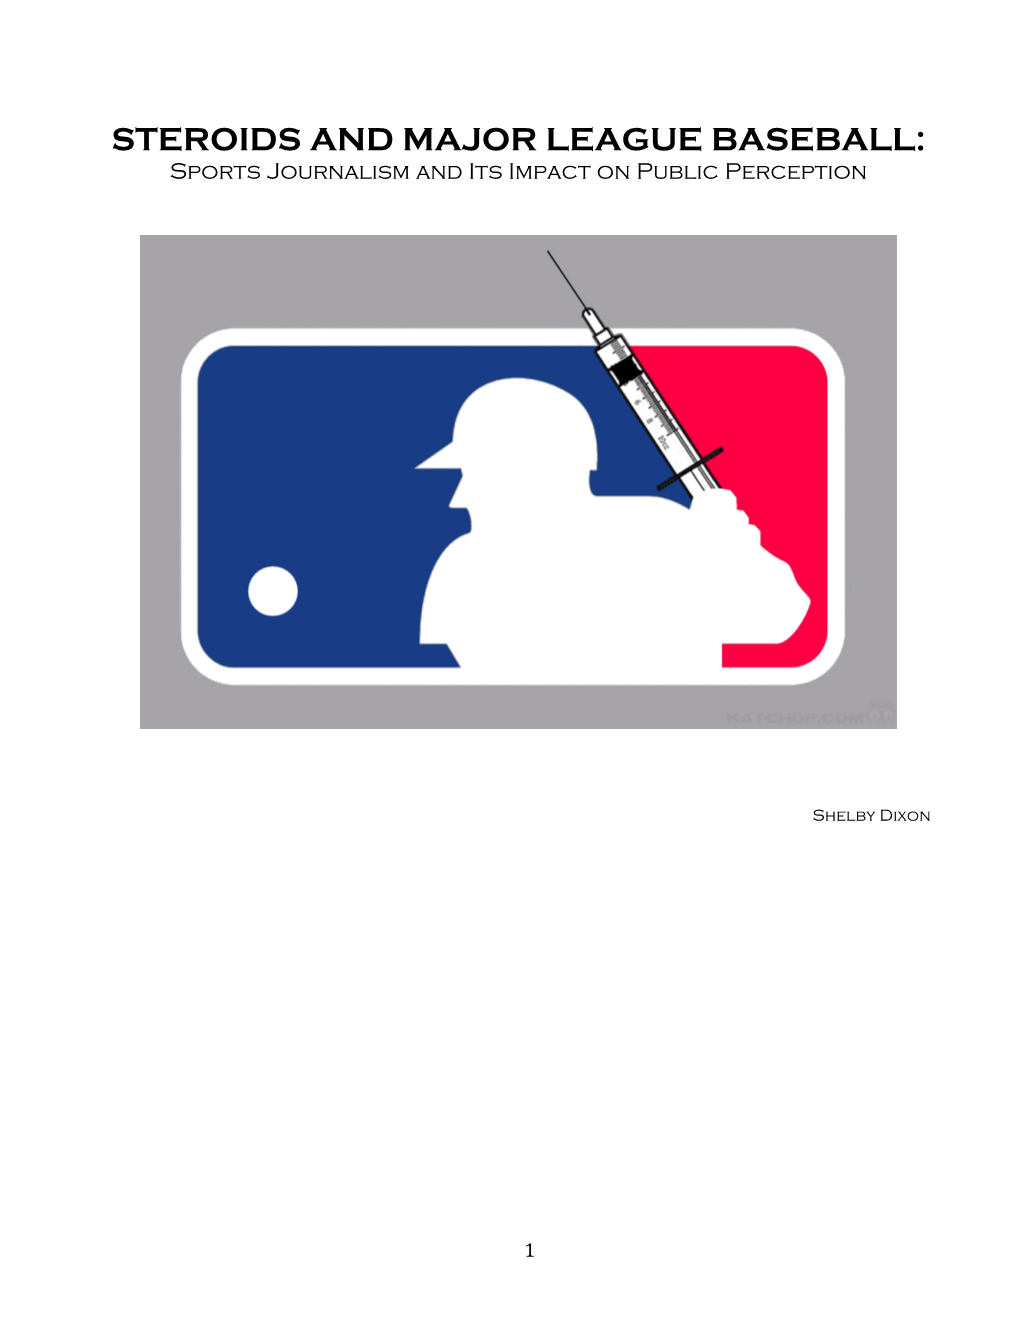 STEROIDS and MAJOR LEAGUE BASEBALL: Sports Journalism and Its Impact on Public Perception